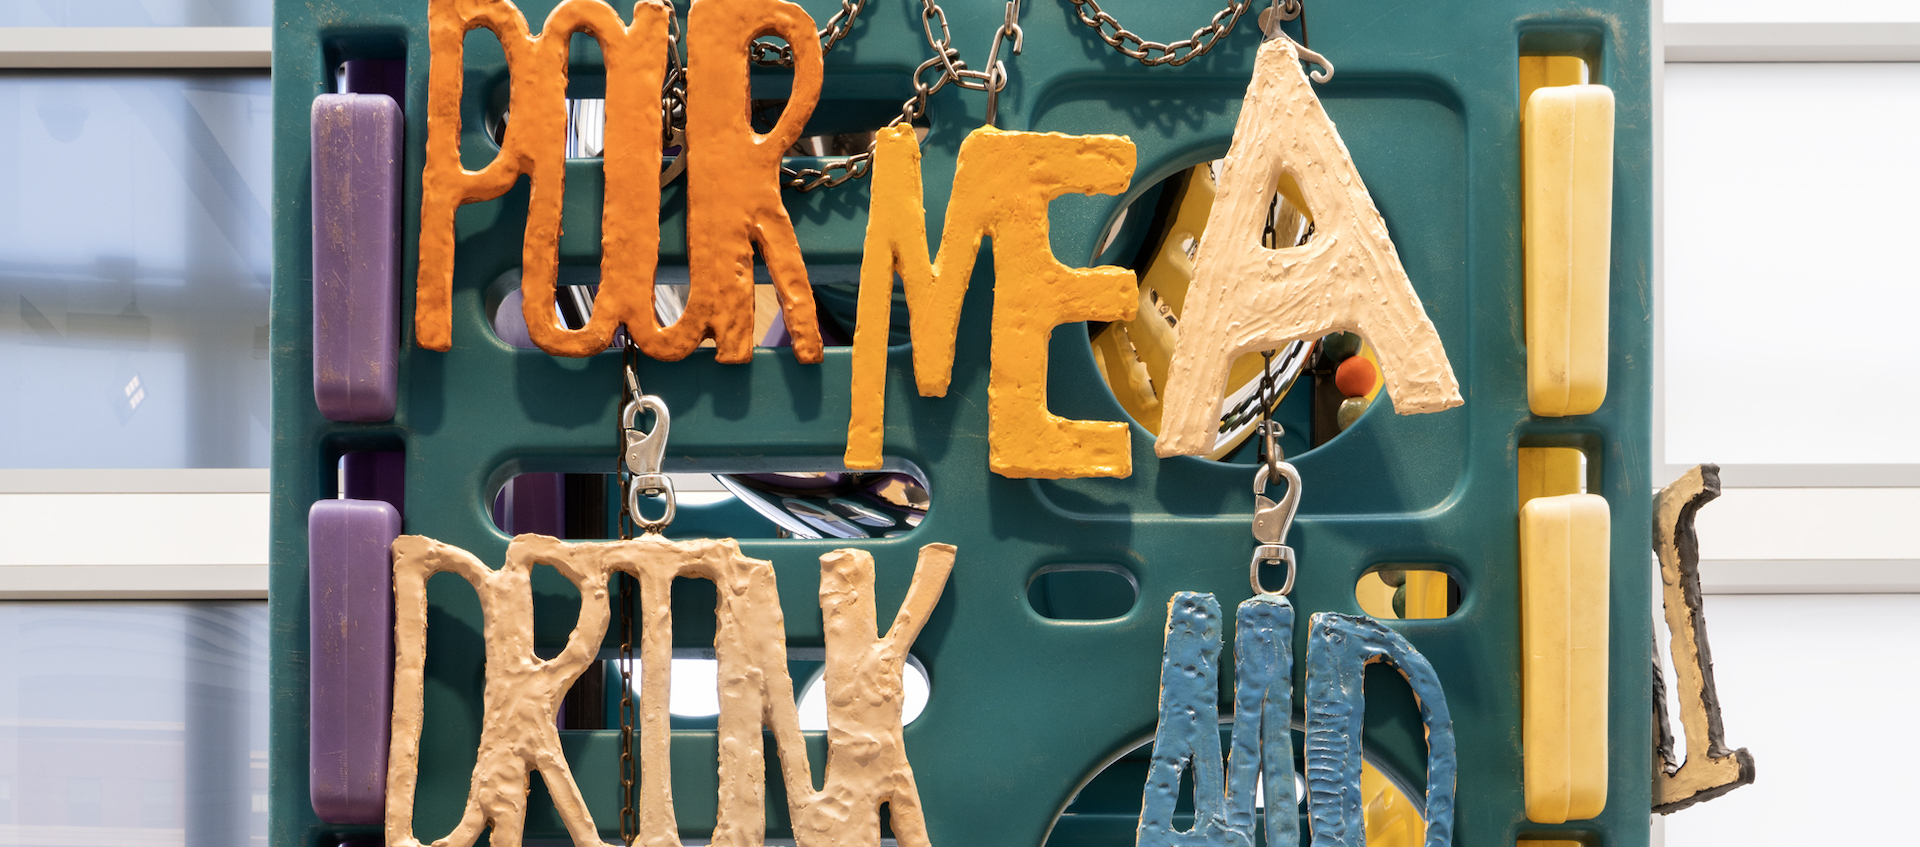 A detail of a colorful sculptural work with hand wrought lettering that spells out “Pour me a drink and...”